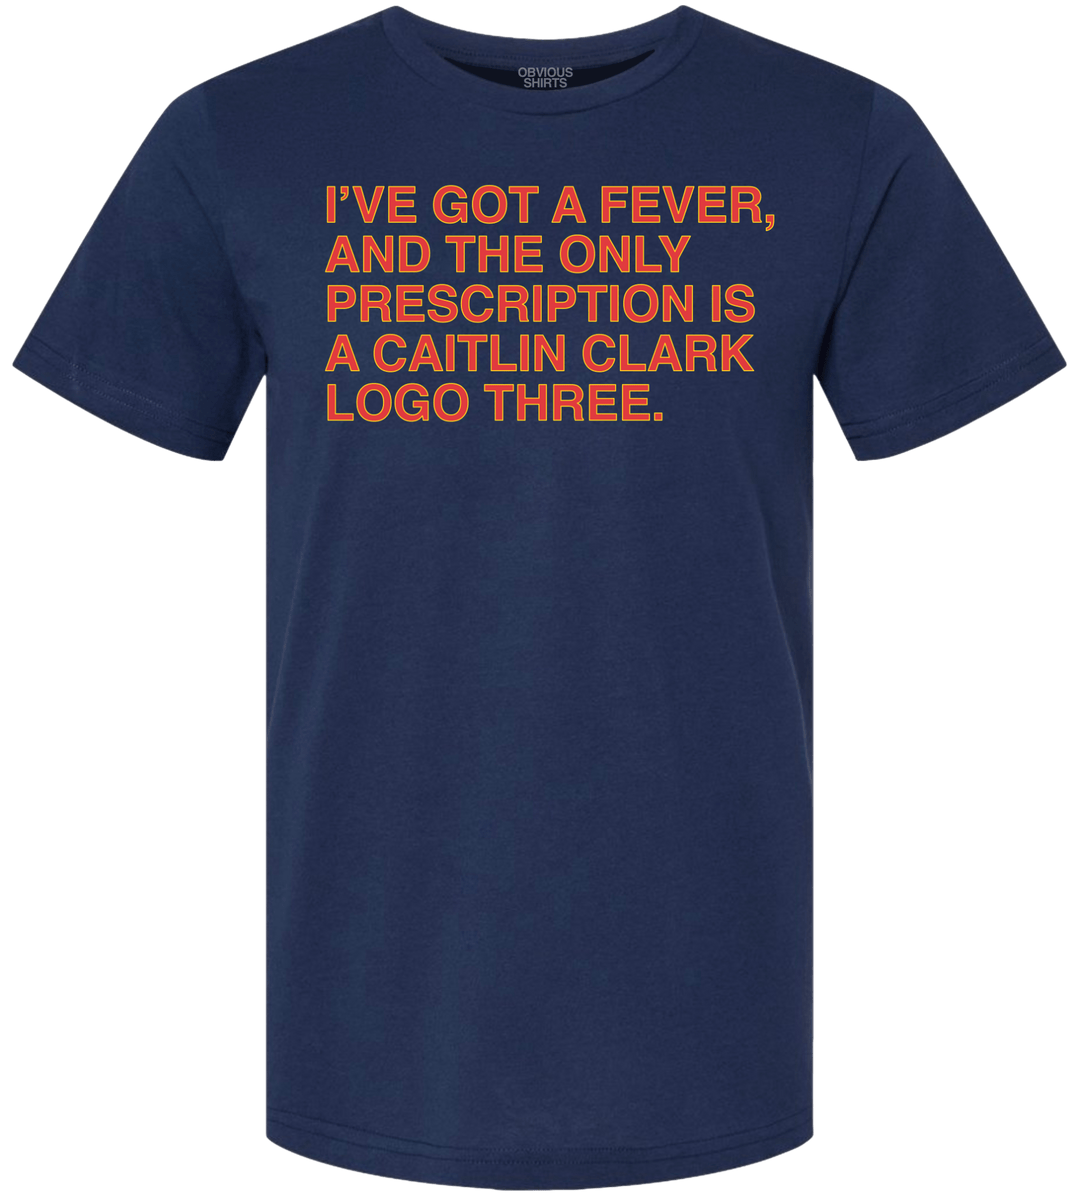 I'VE GOT A FEVER. - OBVIOUS SHIRTS